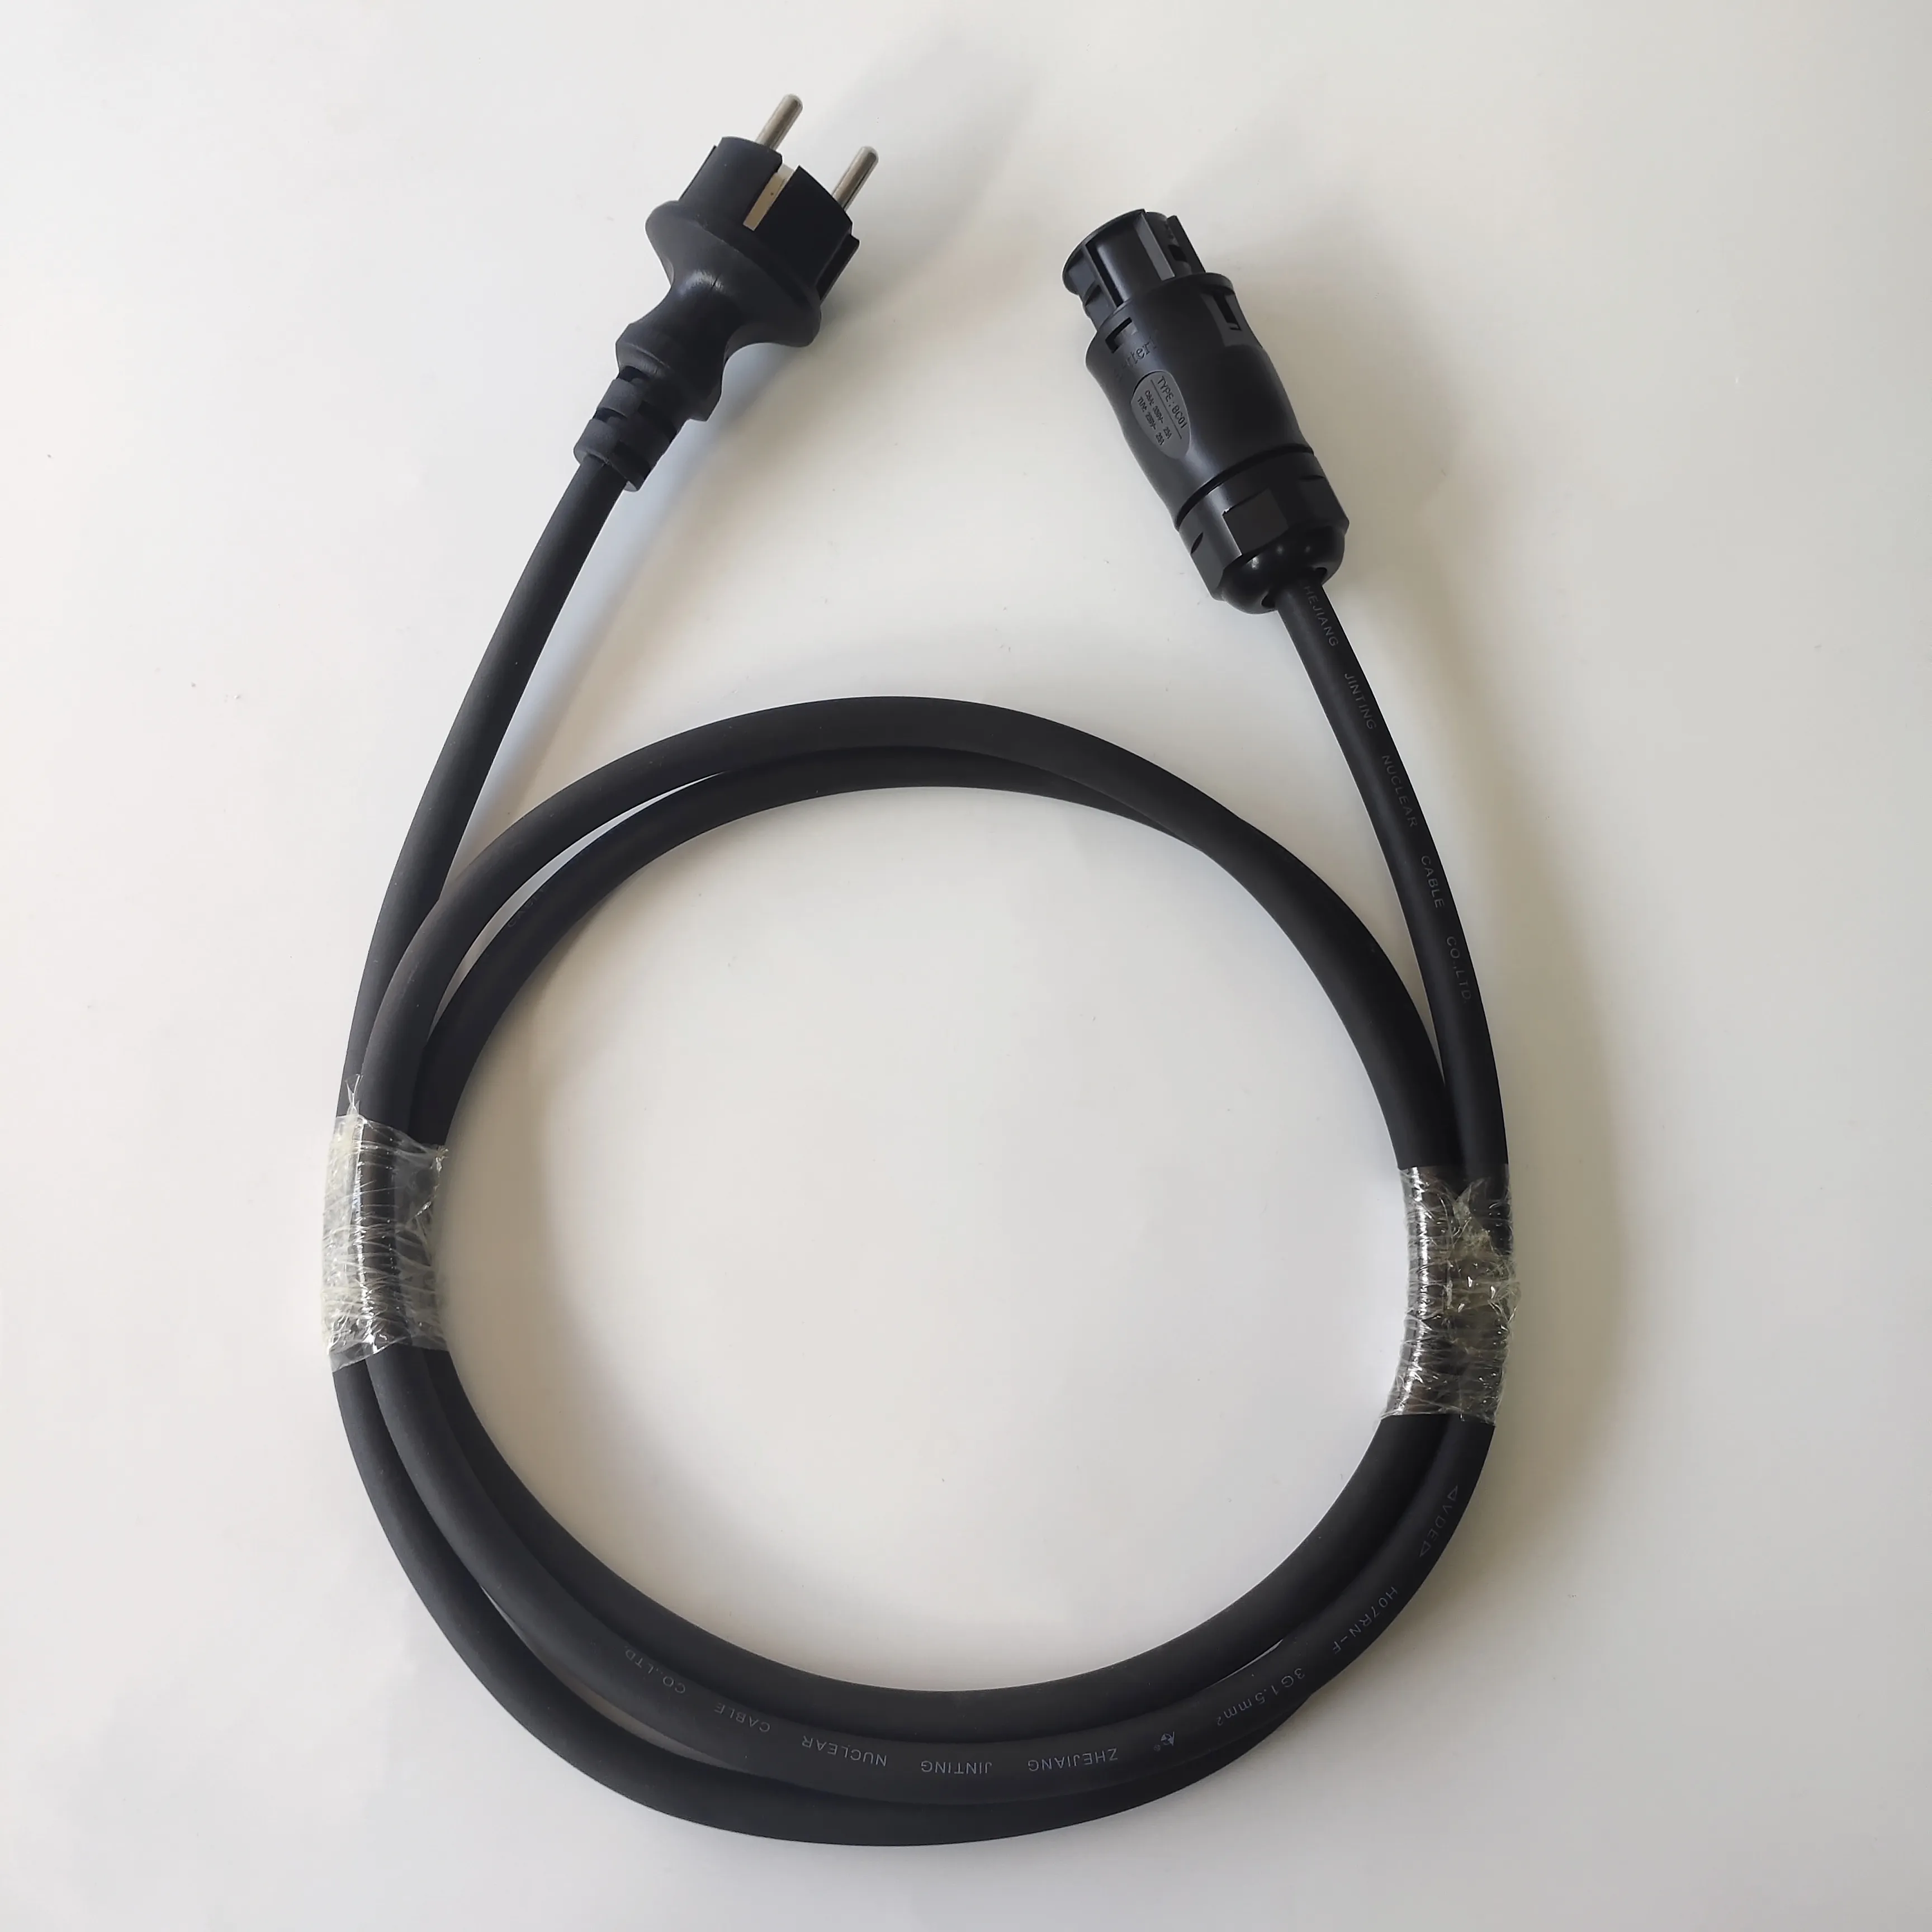 Cable Solar Cable H07RN-F 3G1.5 Power 5M Cable Bc01 Female AC Cable Inverter SCHUKO CEE 7/7 Euro Solar Micro Inverter Photovoltaic Power Systems